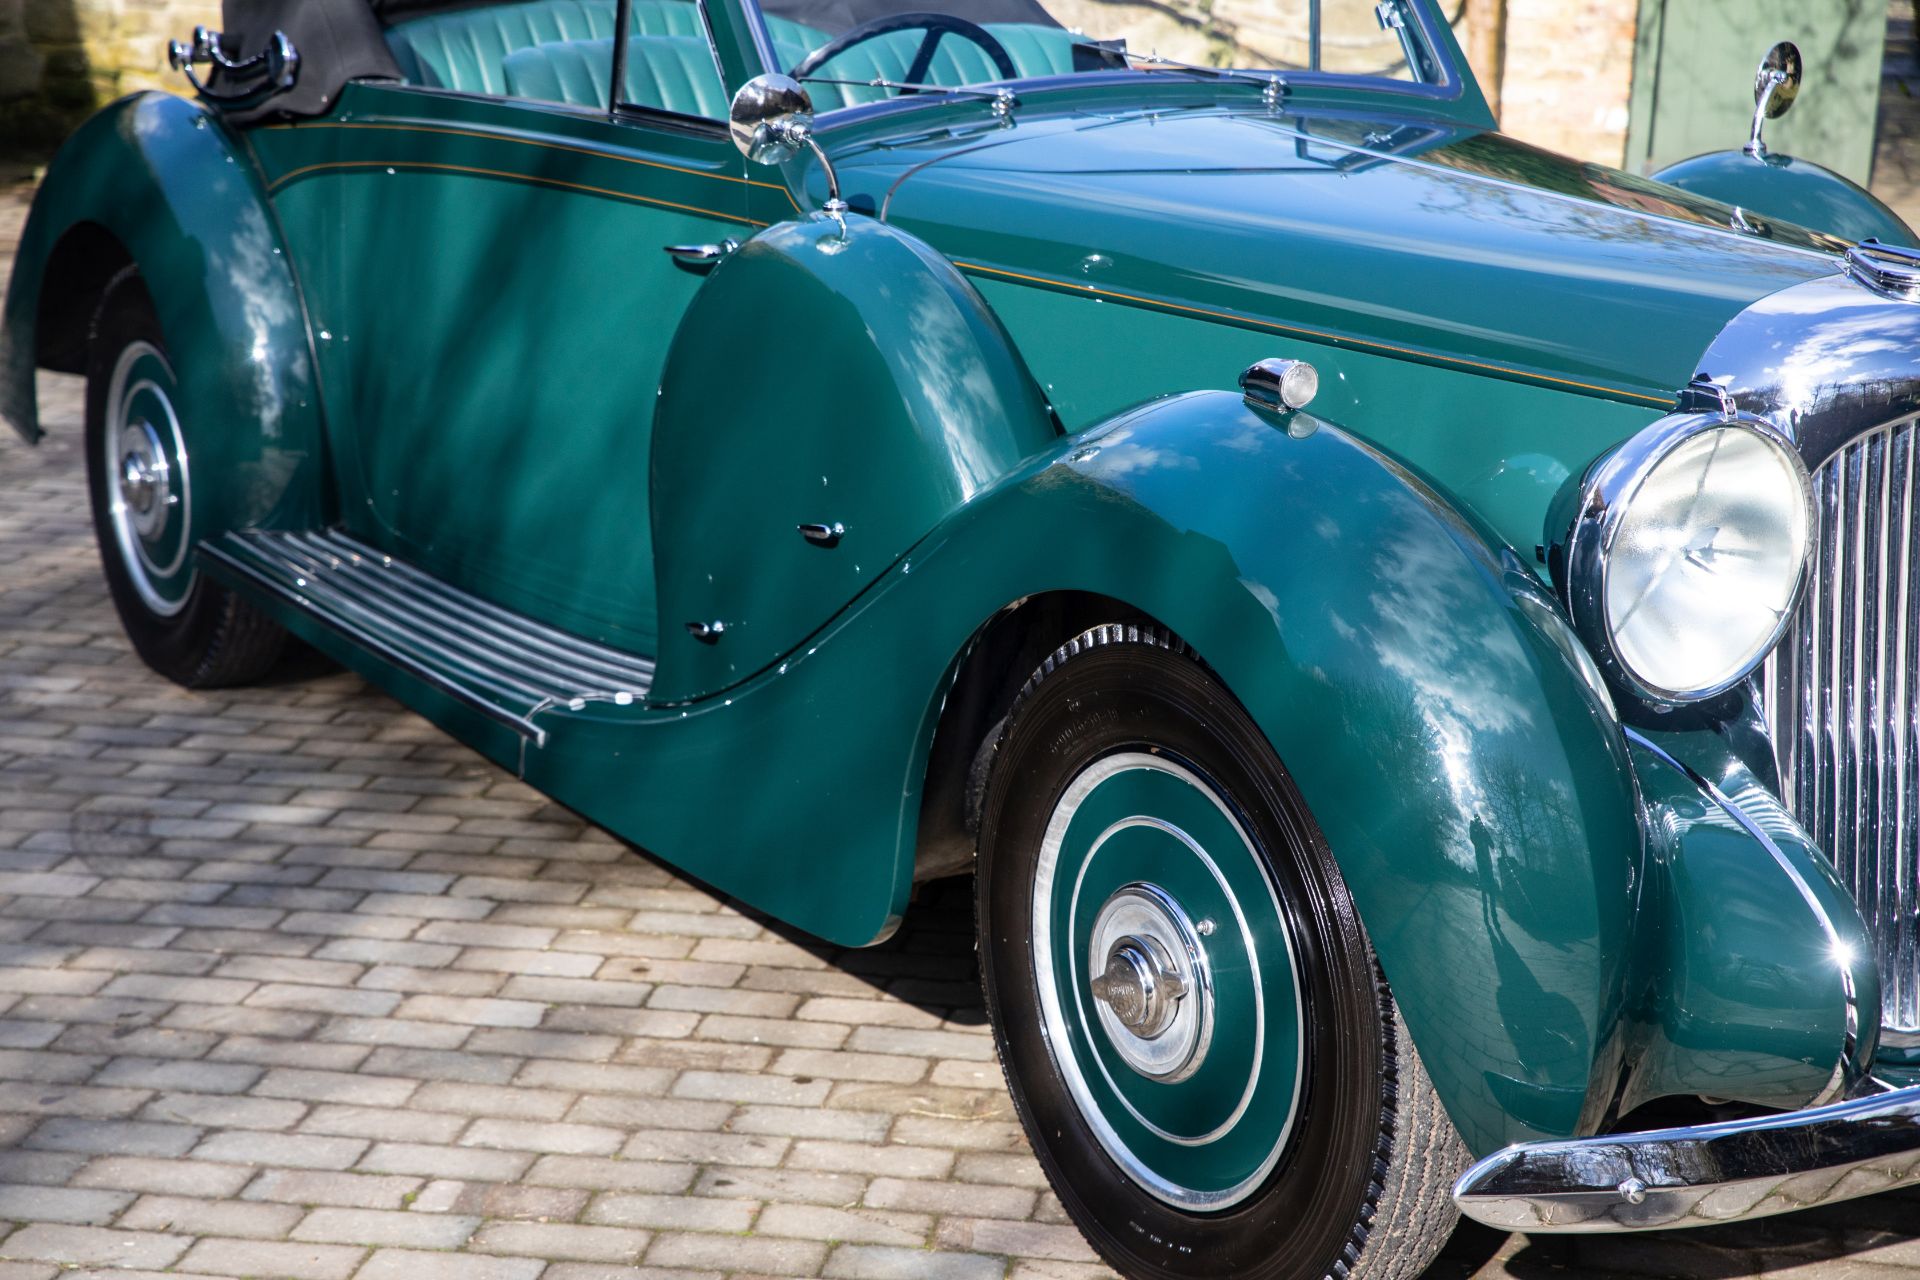 Offered from the estate of the late Michael Patrick Aiken, MBE,1939 Lagonda V12 Drophead Coupé C... - Bild 33 aus 64